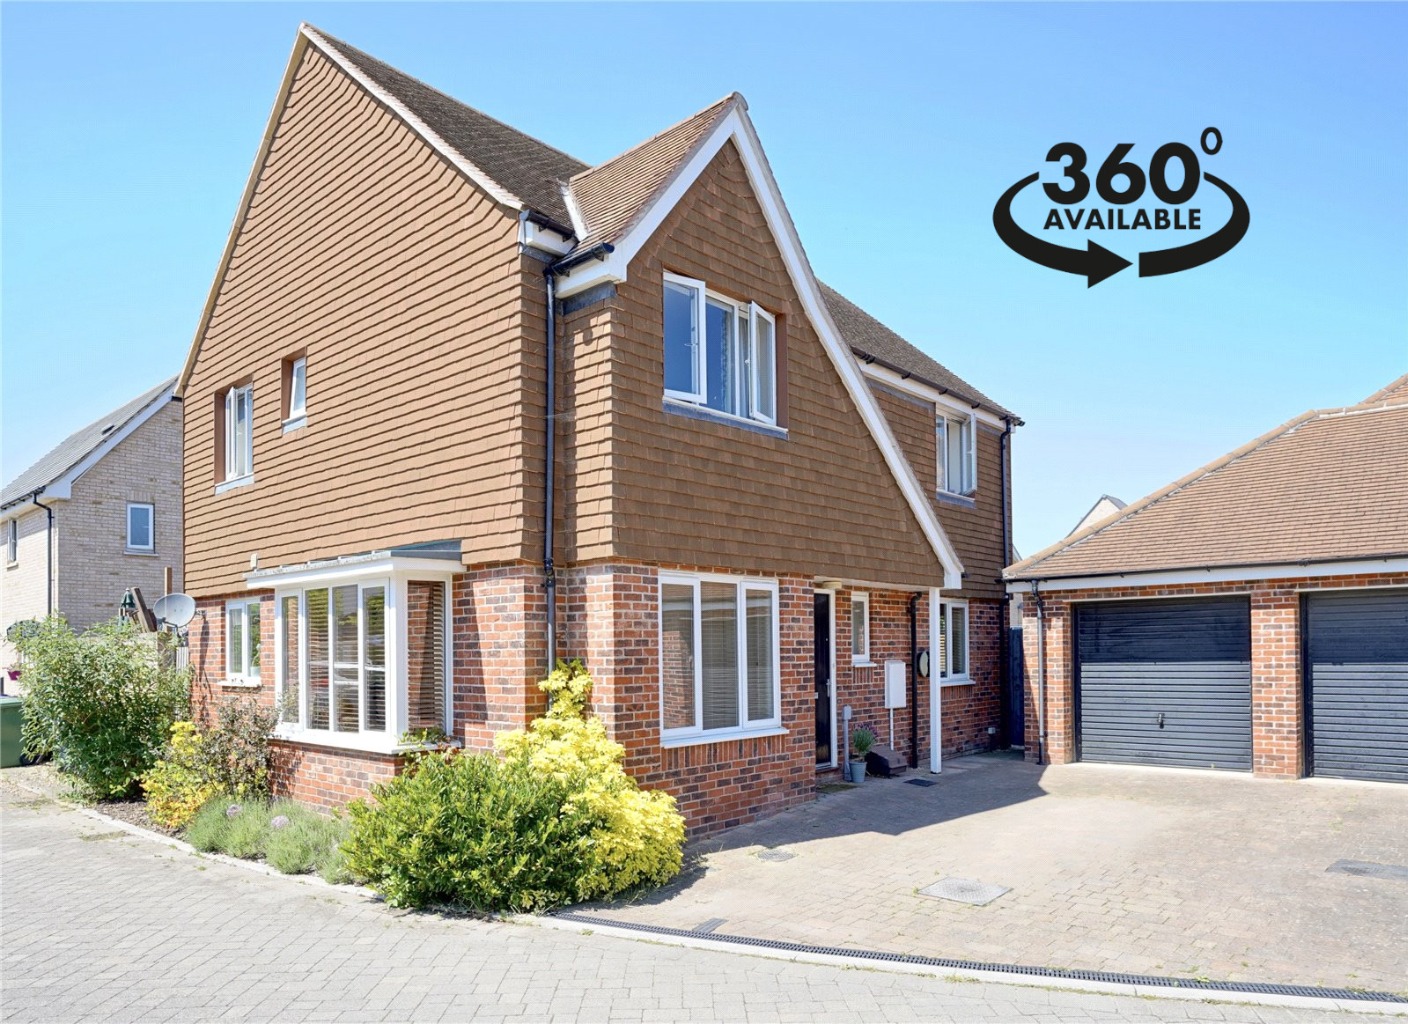 4 bed detached house for sale in Wood Ridge Crescent, St. Neots - Property Image 1